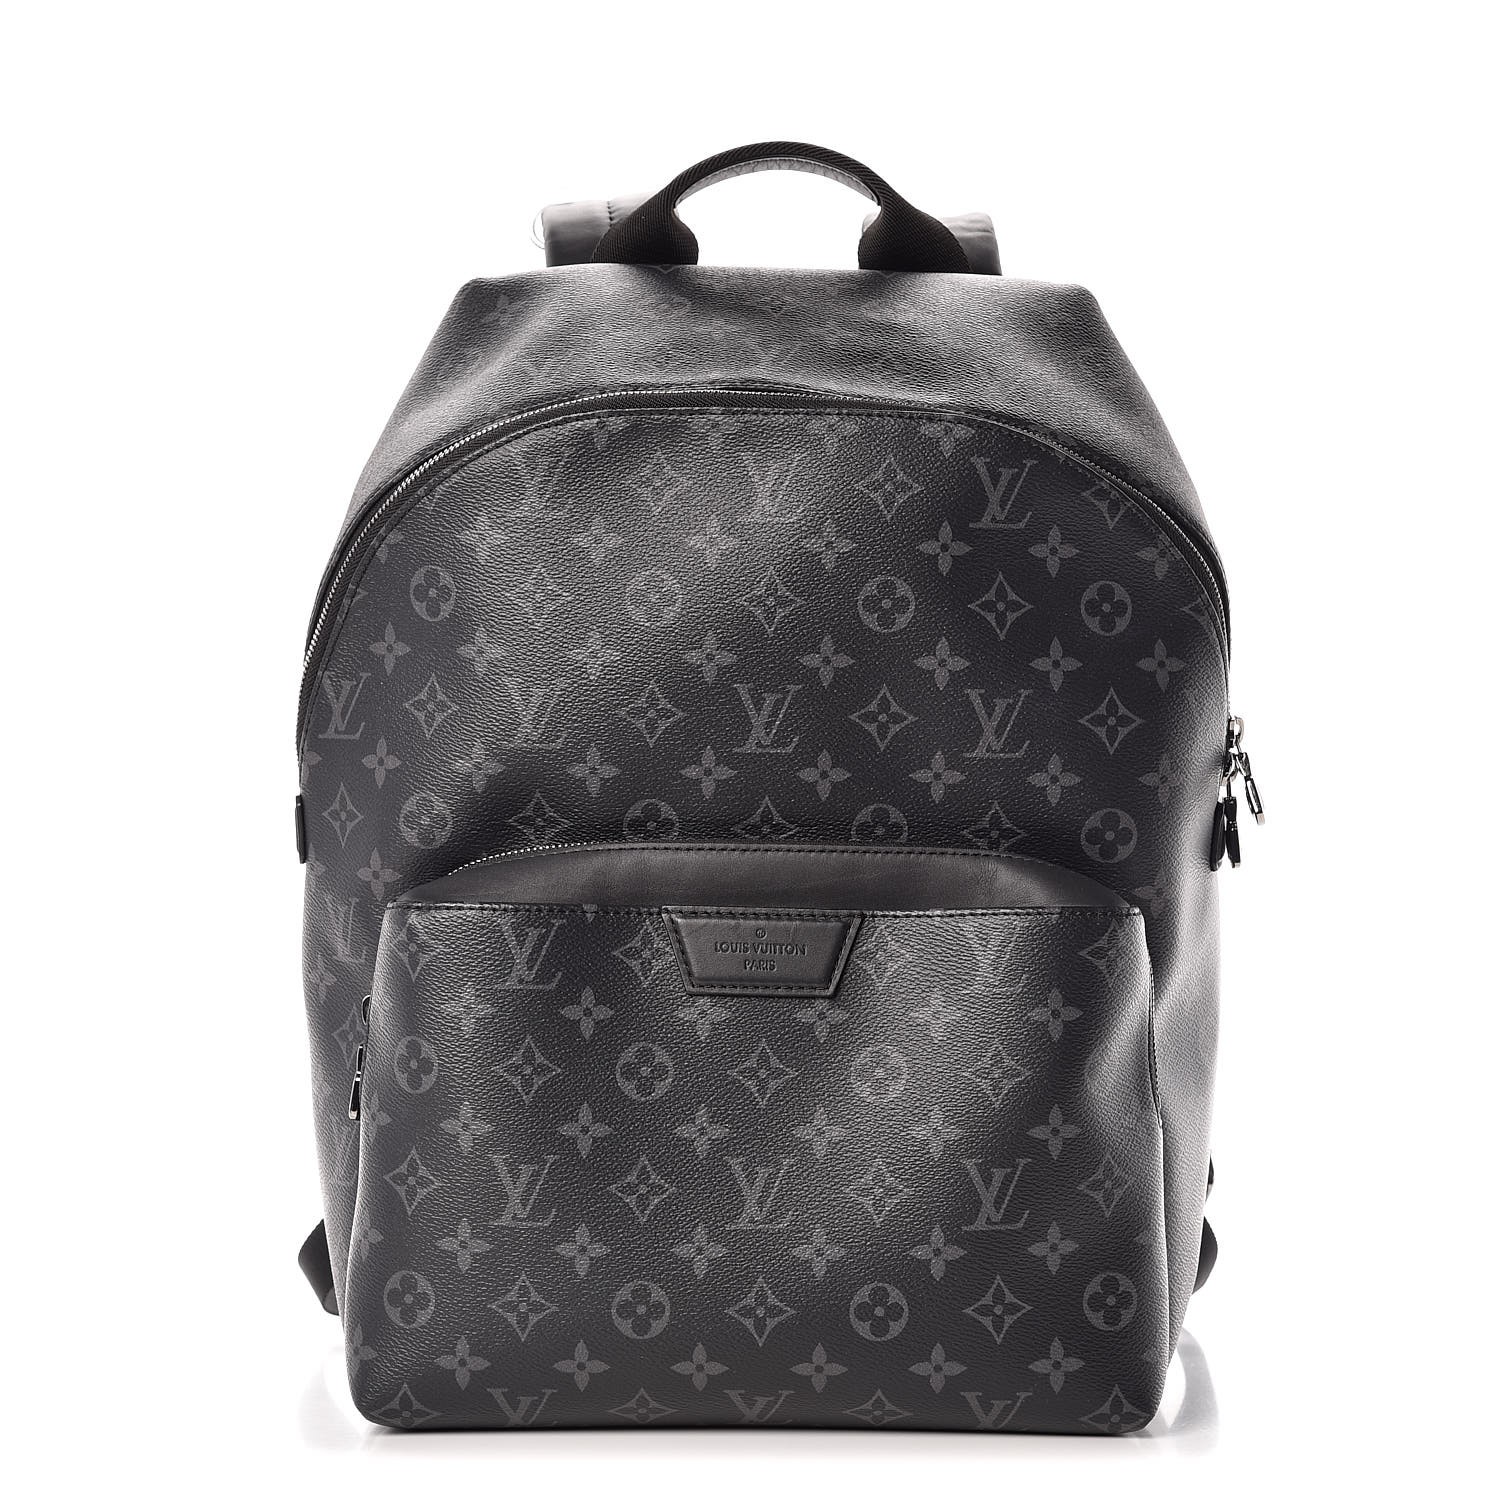 Louis Vuitton Discovery Backpack Pm Reviewed | Paul Smith